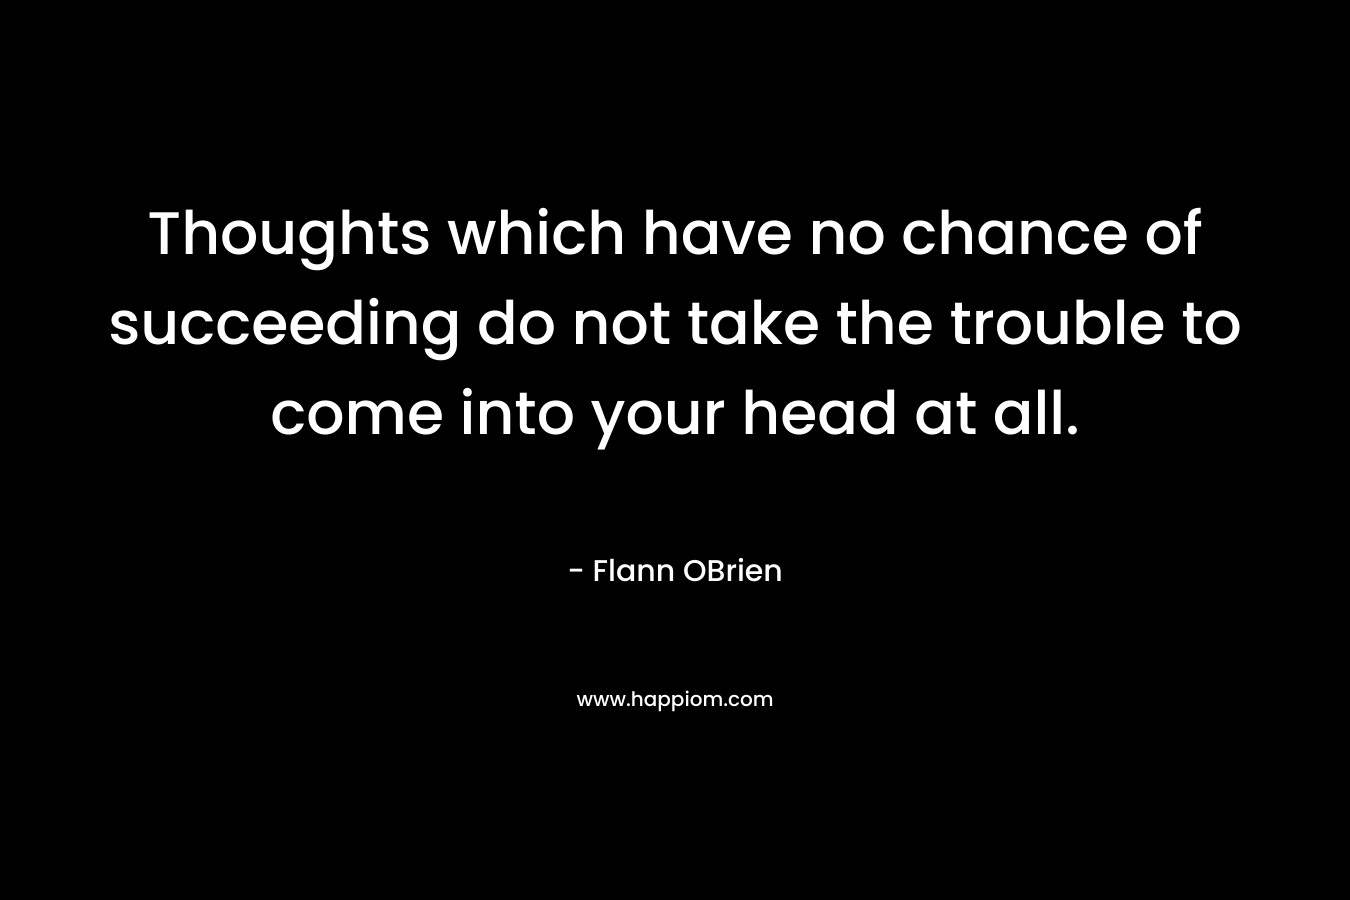 Thoughts which have no chance of succeeding do not take the trouble to come into your head at all. – Flann OBrien